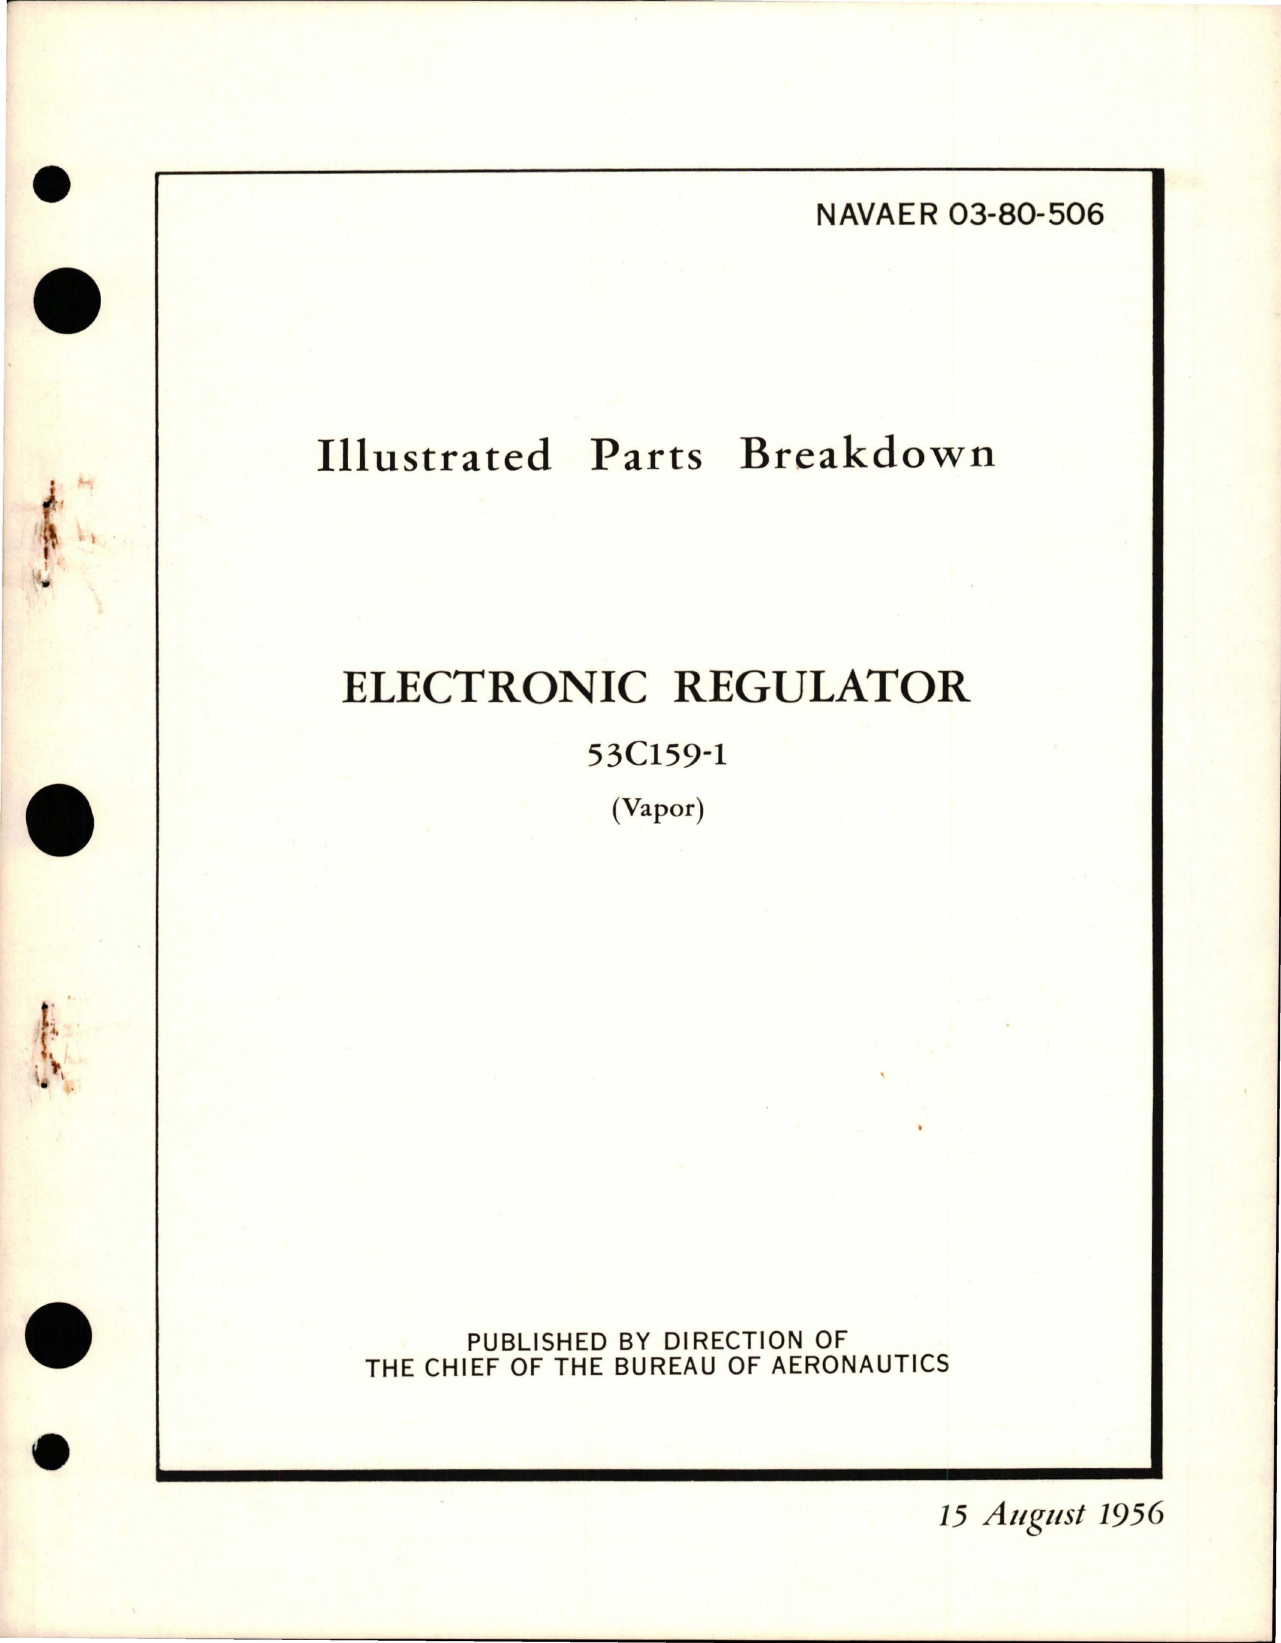 Sample page 1 from AirCorps Library document: Illustrated Parts Breakdown for Electronic Regulator - 53C159-1